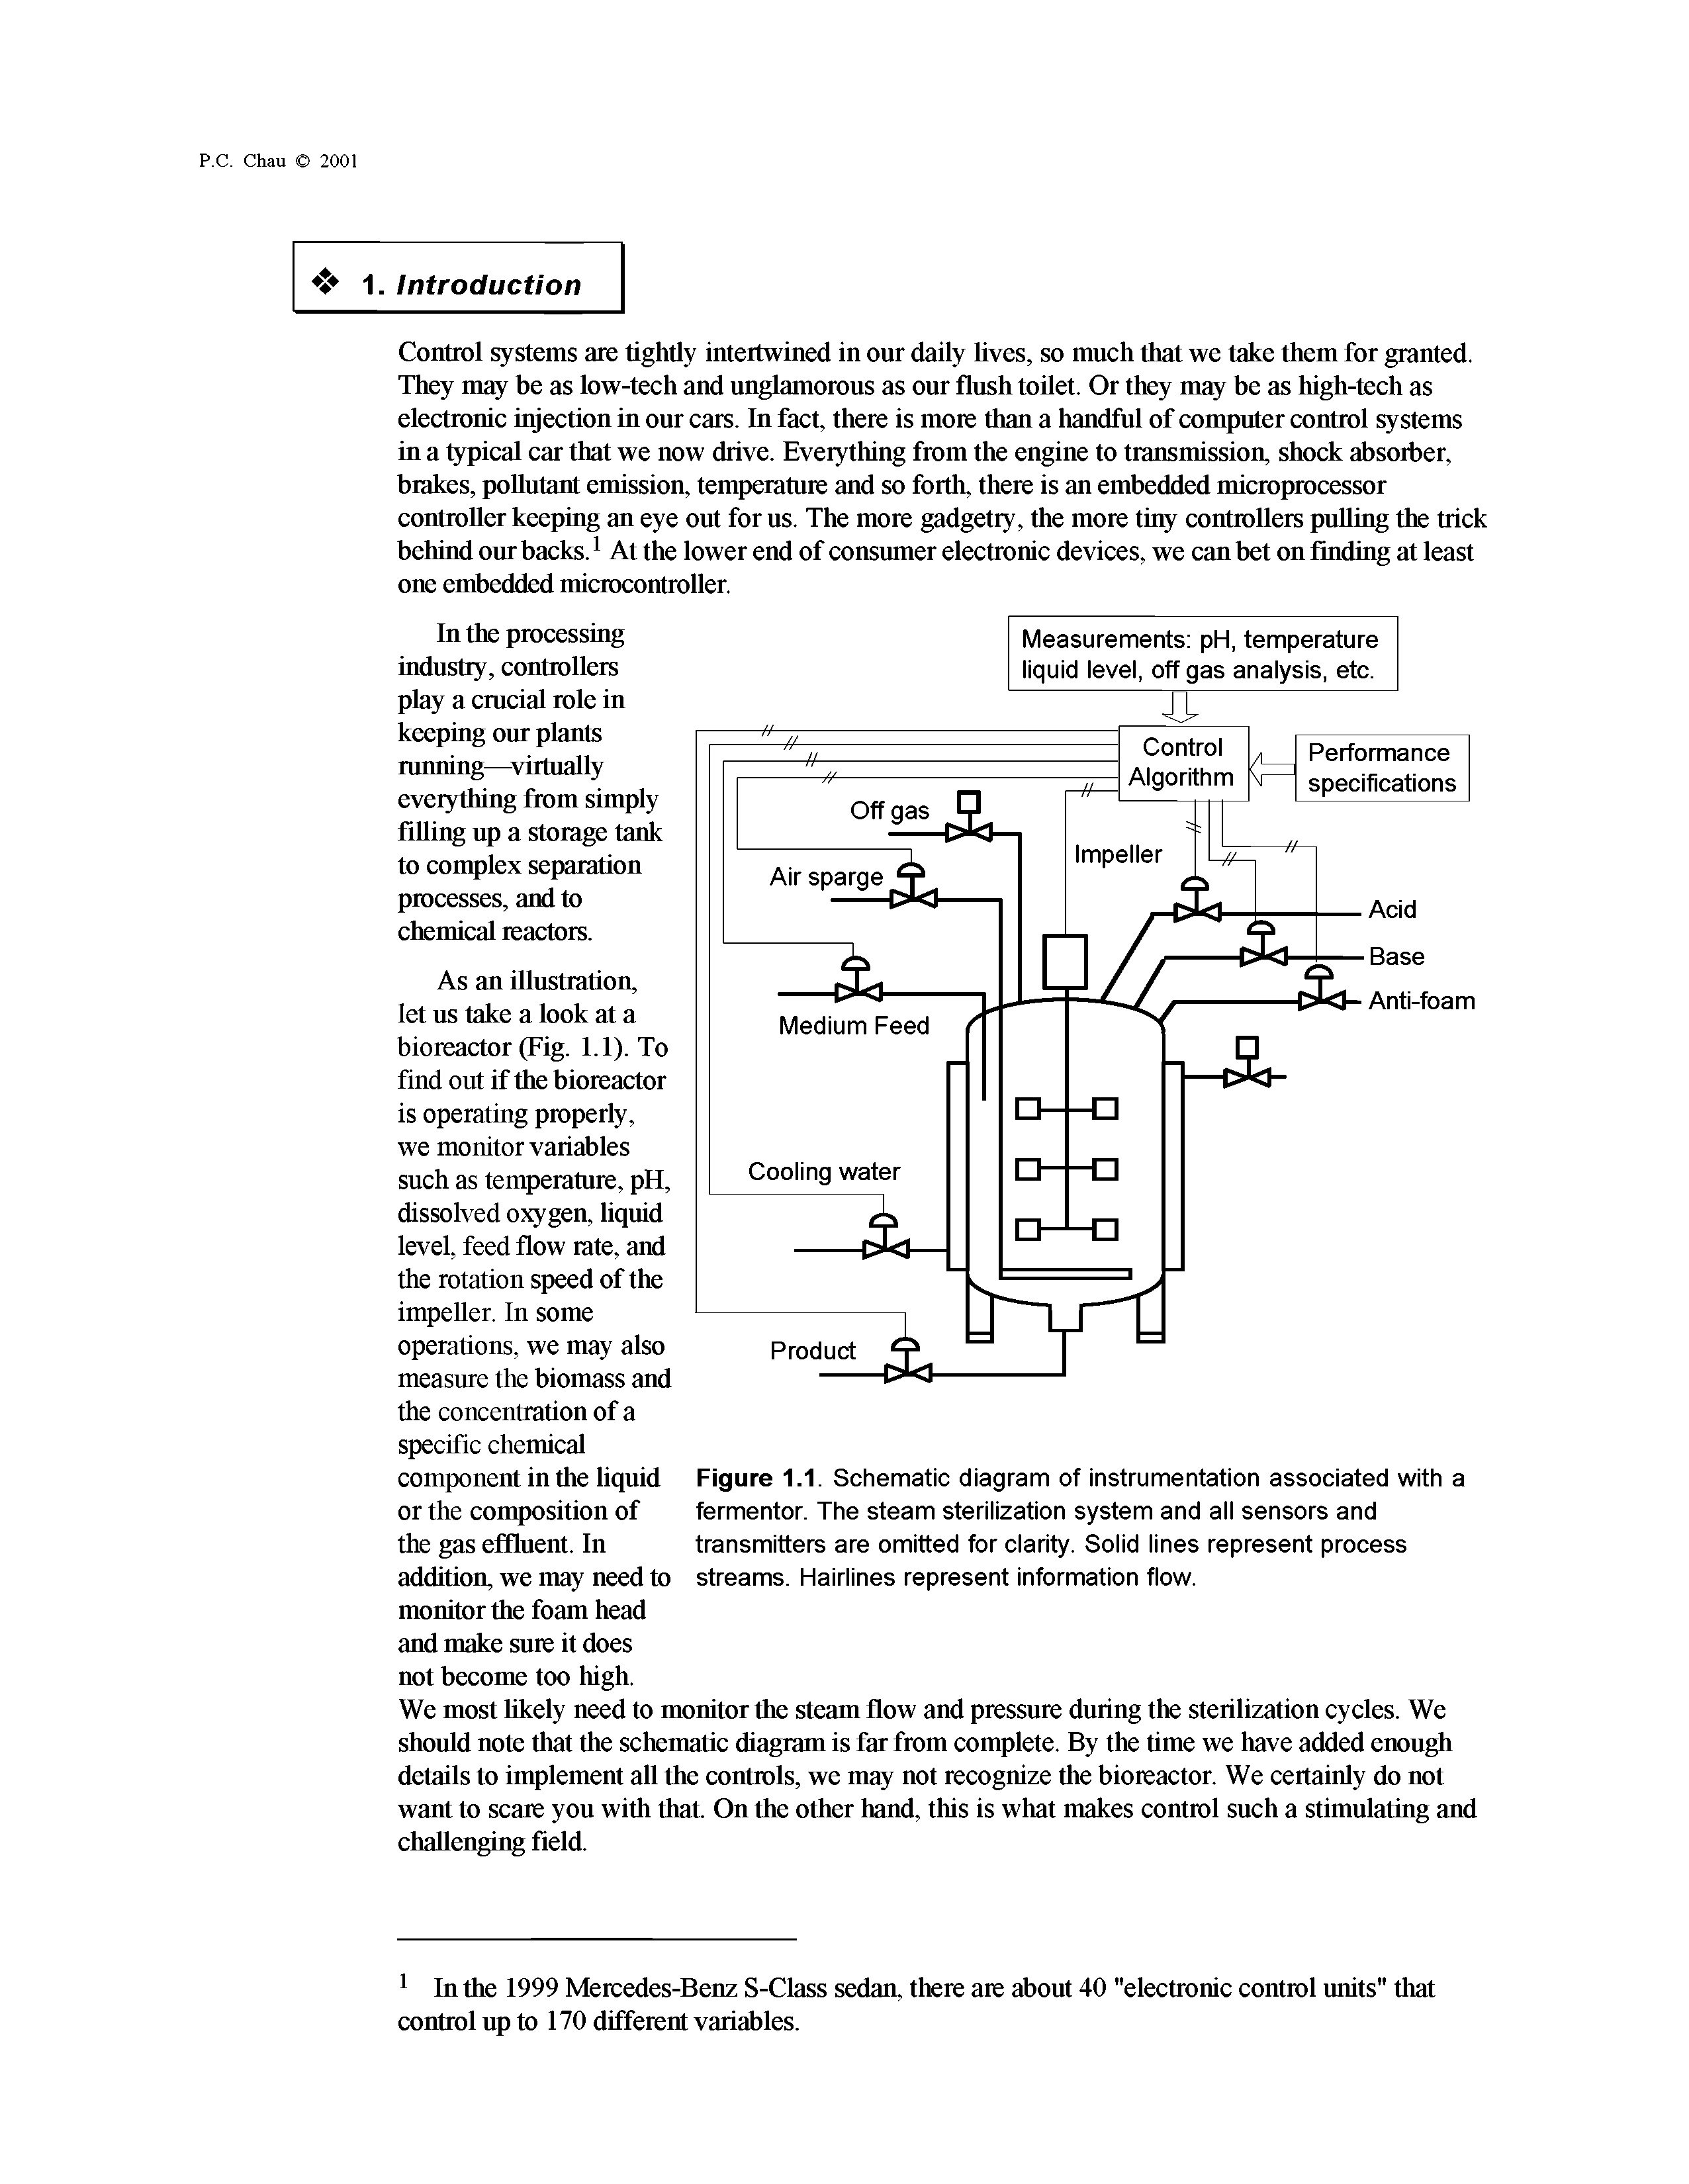 Figure 1.1. Schematic diagram of instrumentation associated with a fermentor. The steam sterilization system and all sensors and transmitters are omitted for clarity. Solid lines represent process streams. Hairlines represent information flow.